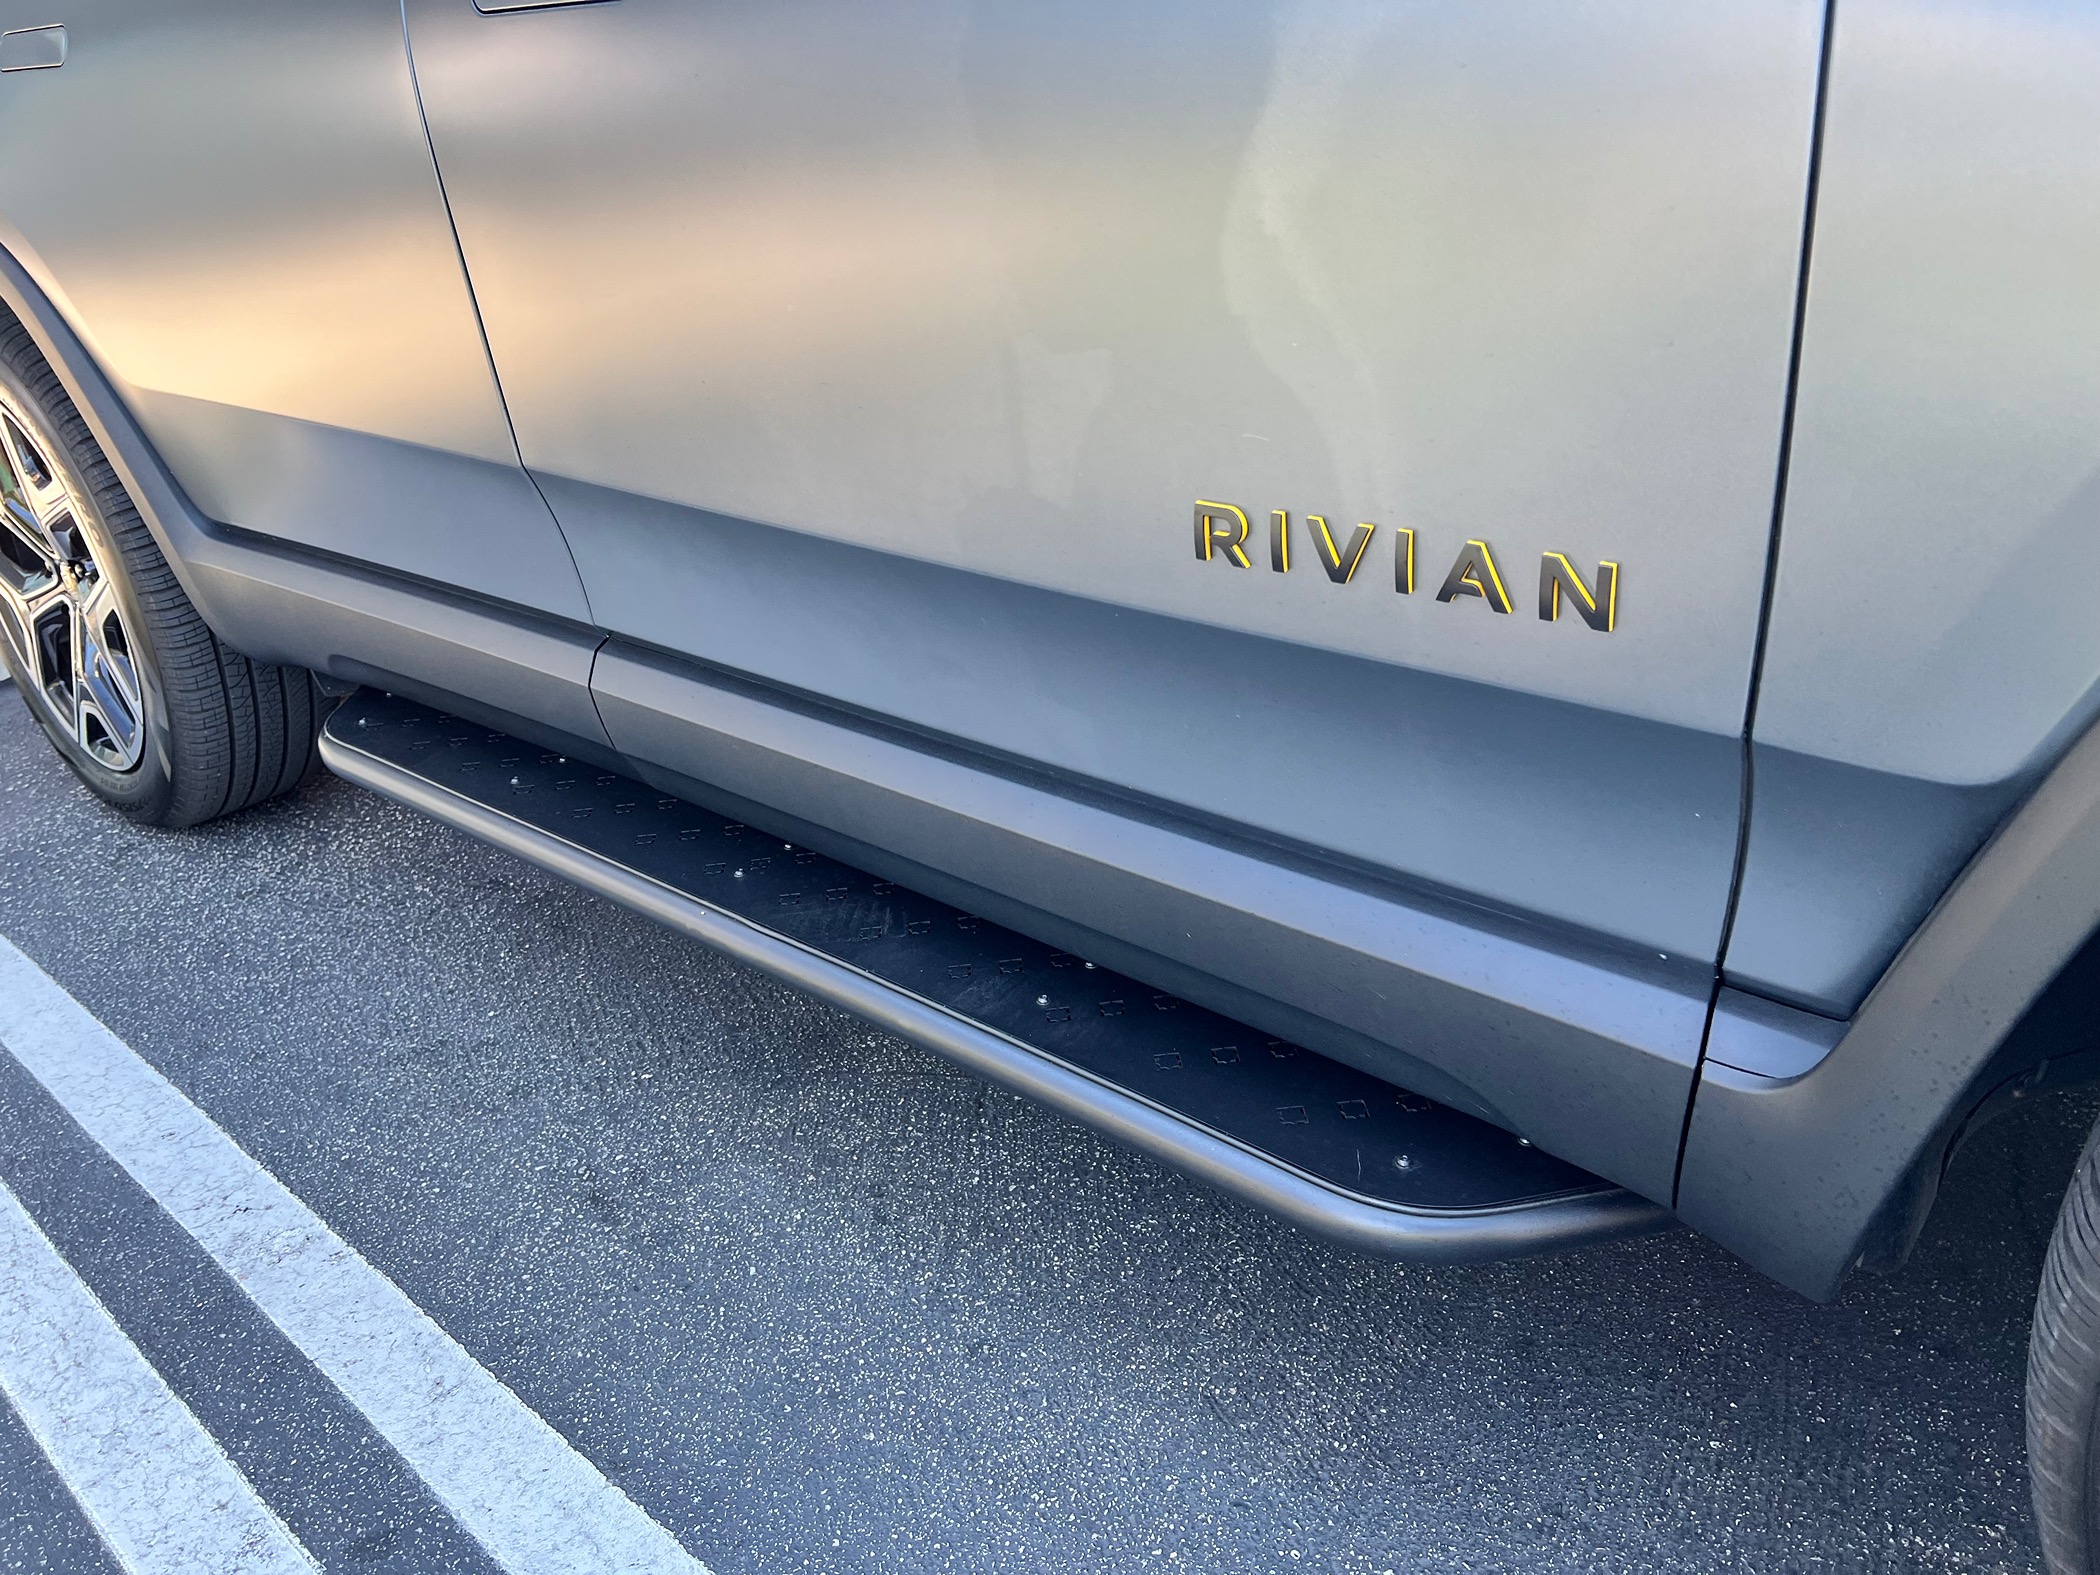 Rivian R1T R1S Which R1S Running Boards are these? IMG_1612